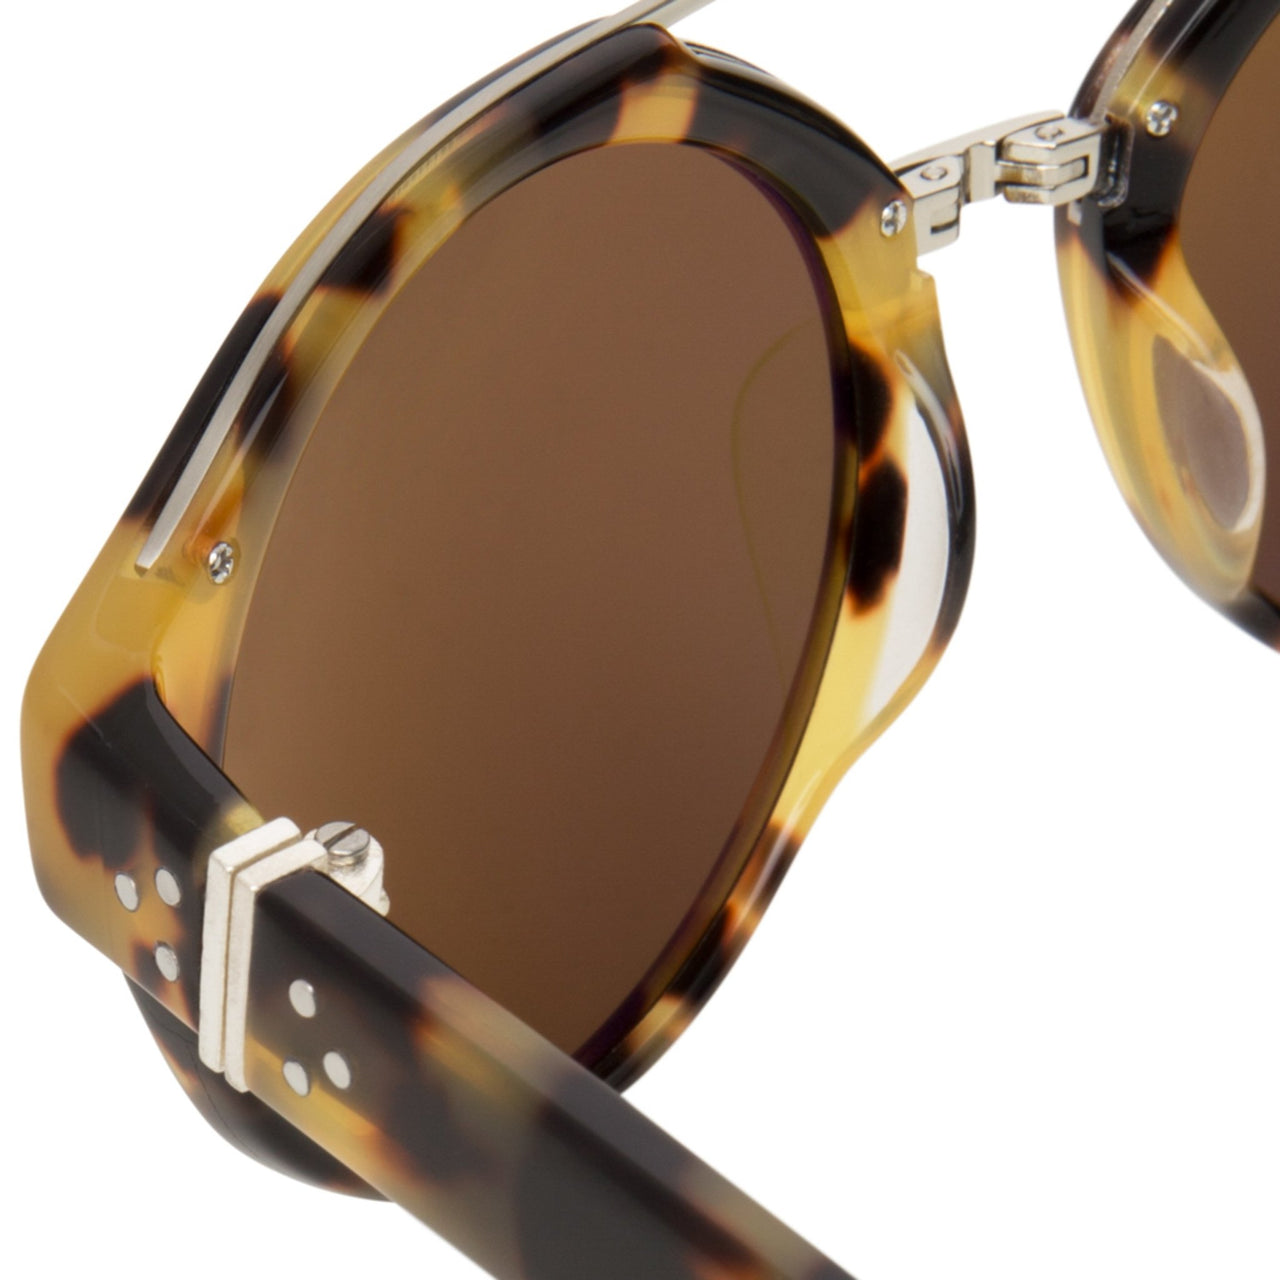 Ann Demeulemeester Sunglasses Round Tortoise Shell Titanium 925 Silver with Brown Lenses CAT3 AD45C2SUN - Watches & Crystals